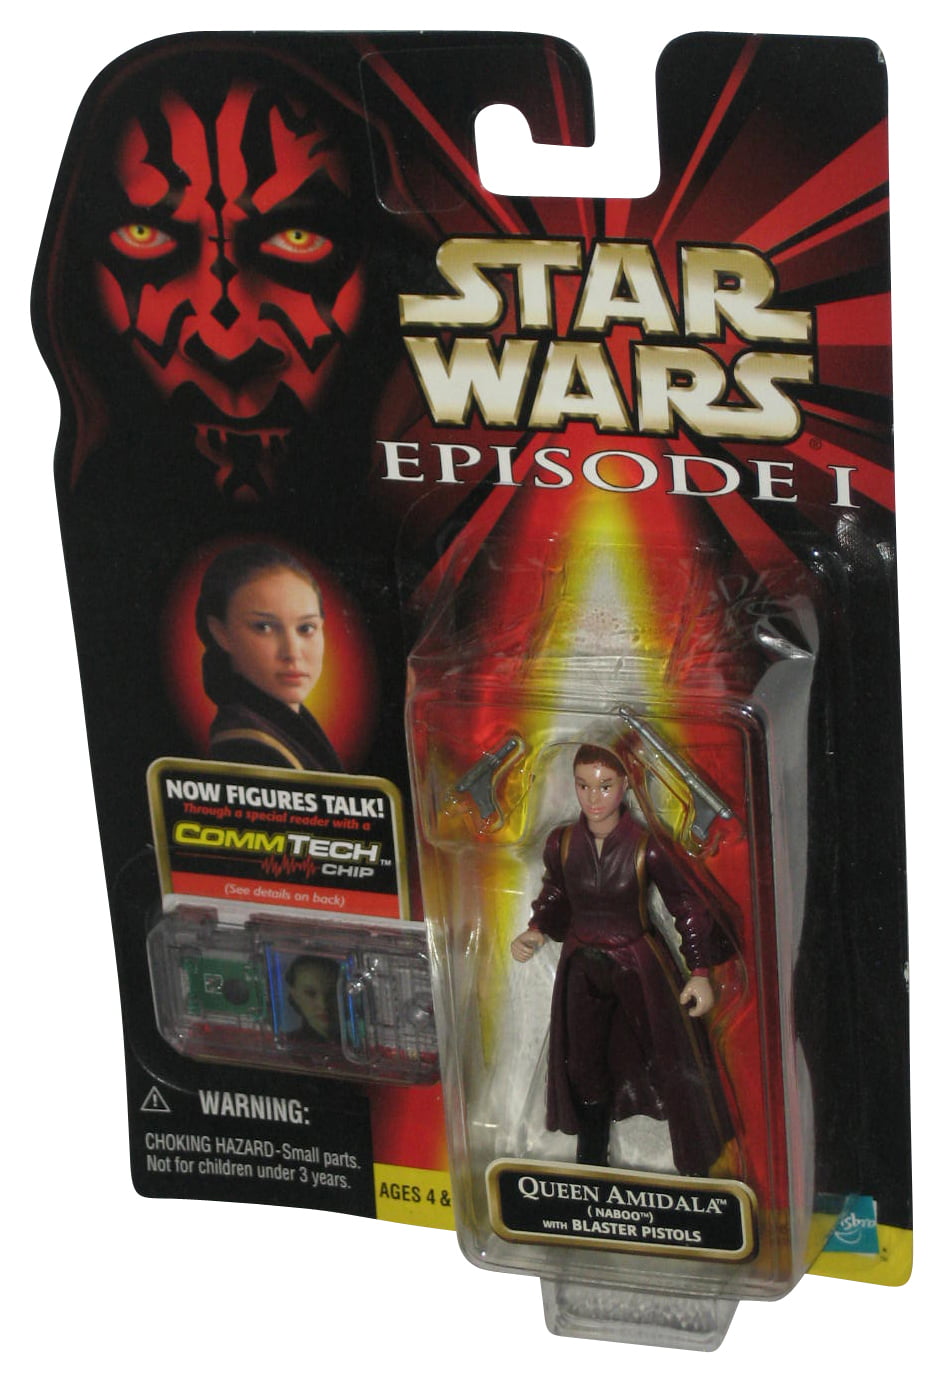 Star Wars Episode I Queen Amidala Naboo (1998) Commtech Chip Action Figure